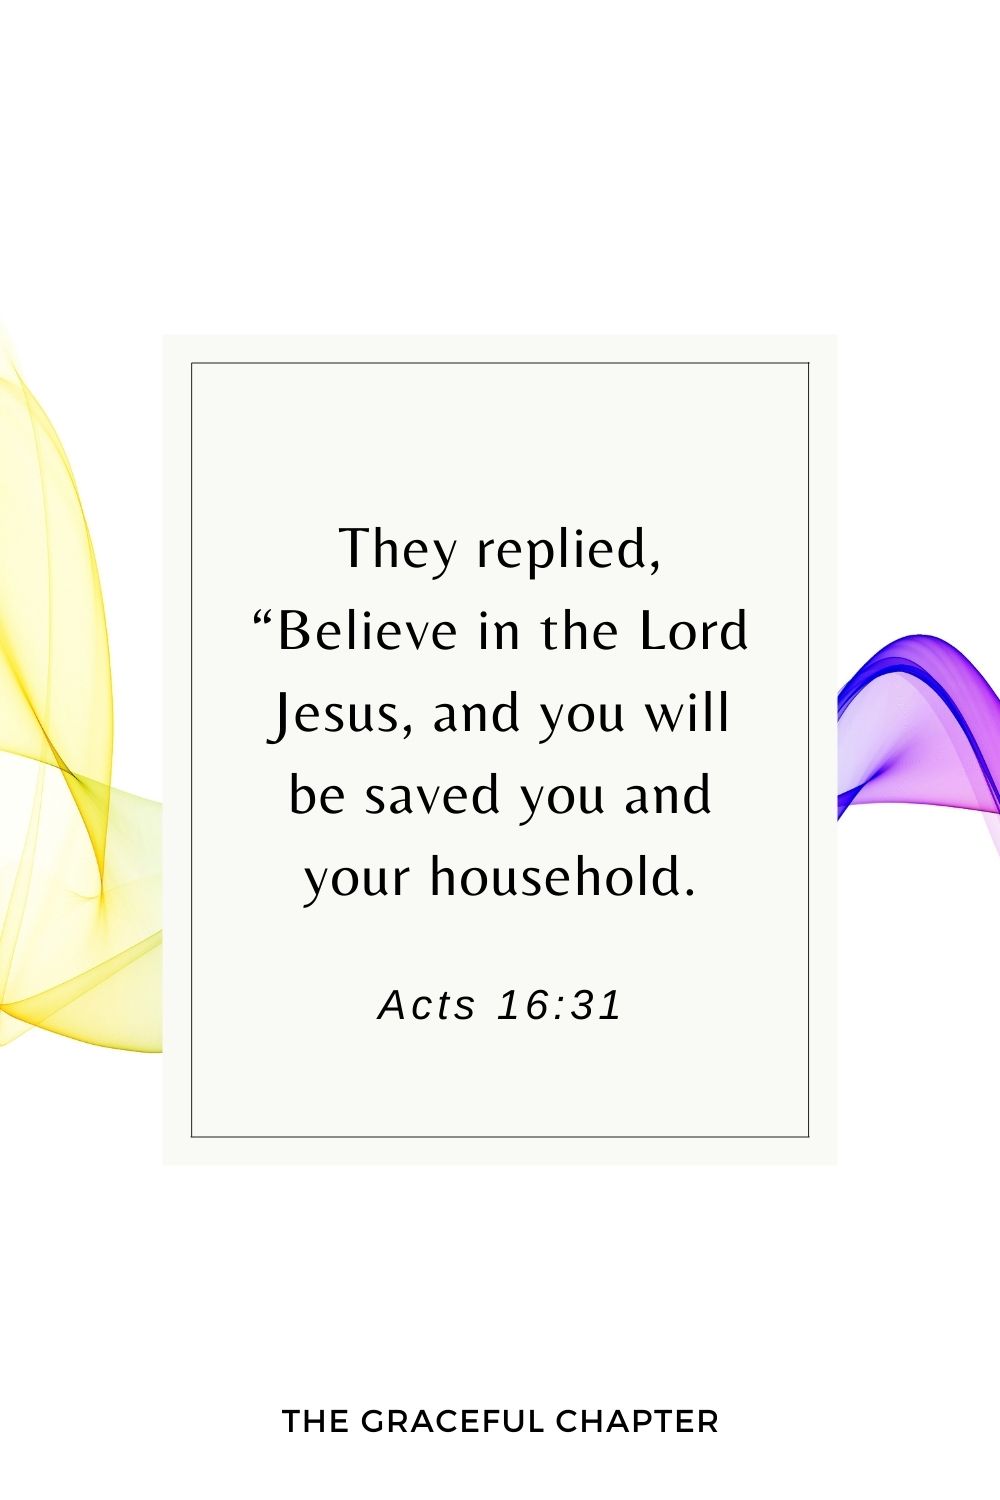 They replied, “Believe in the Lord Jesus, and you will be saved you and your household. Acts 16:31